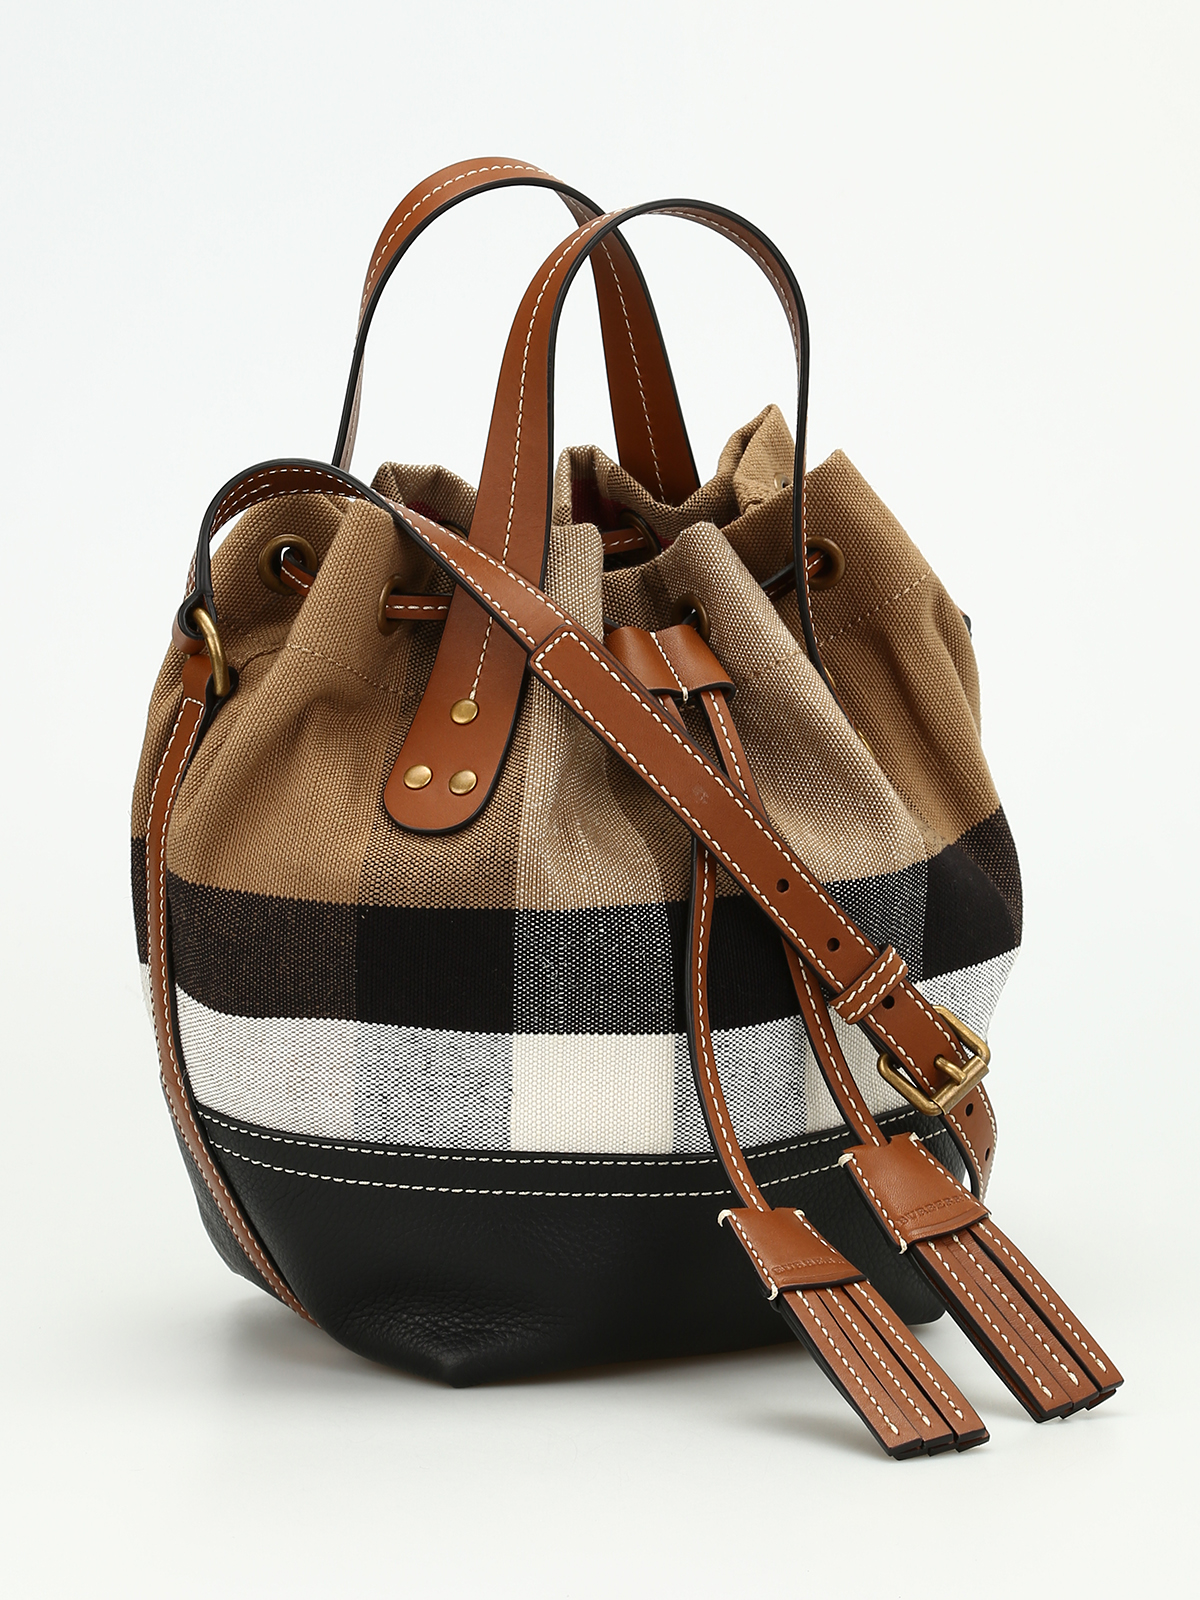 Heston canvas Check small bag by Burberry - Bucket bags | iKRIX